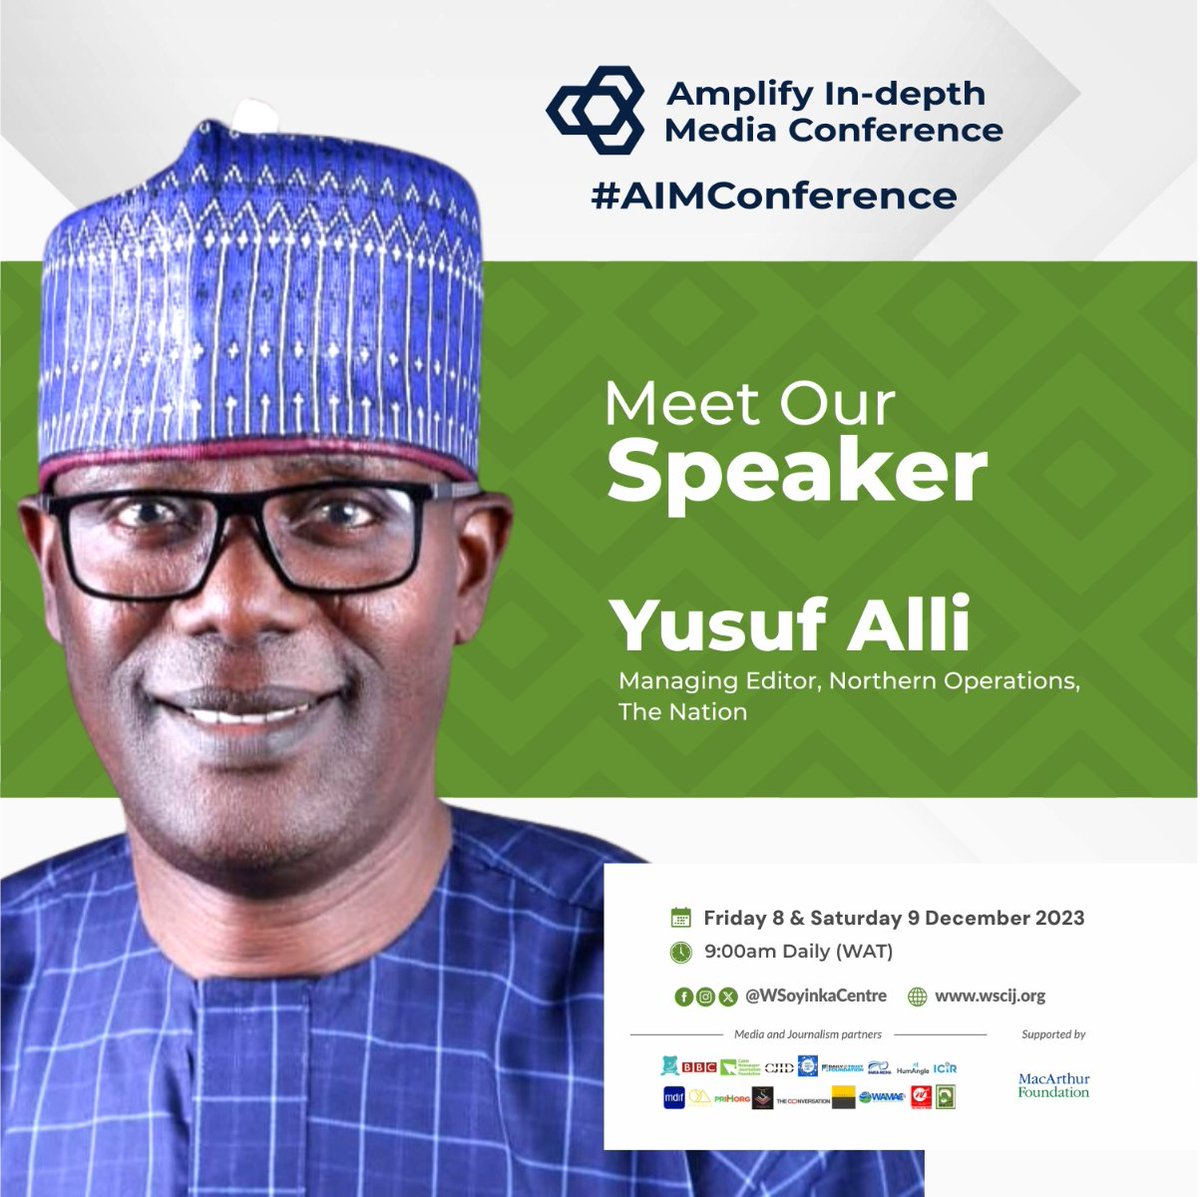 Join the discussion on media ownership structure and its effect on media independence at 2023 #AIMConference 2023. Yusuf Alli, Managing Editor, Northern Operations of @TheNationNews will join other panellists to explain ownership dynamics and influence on media landscape